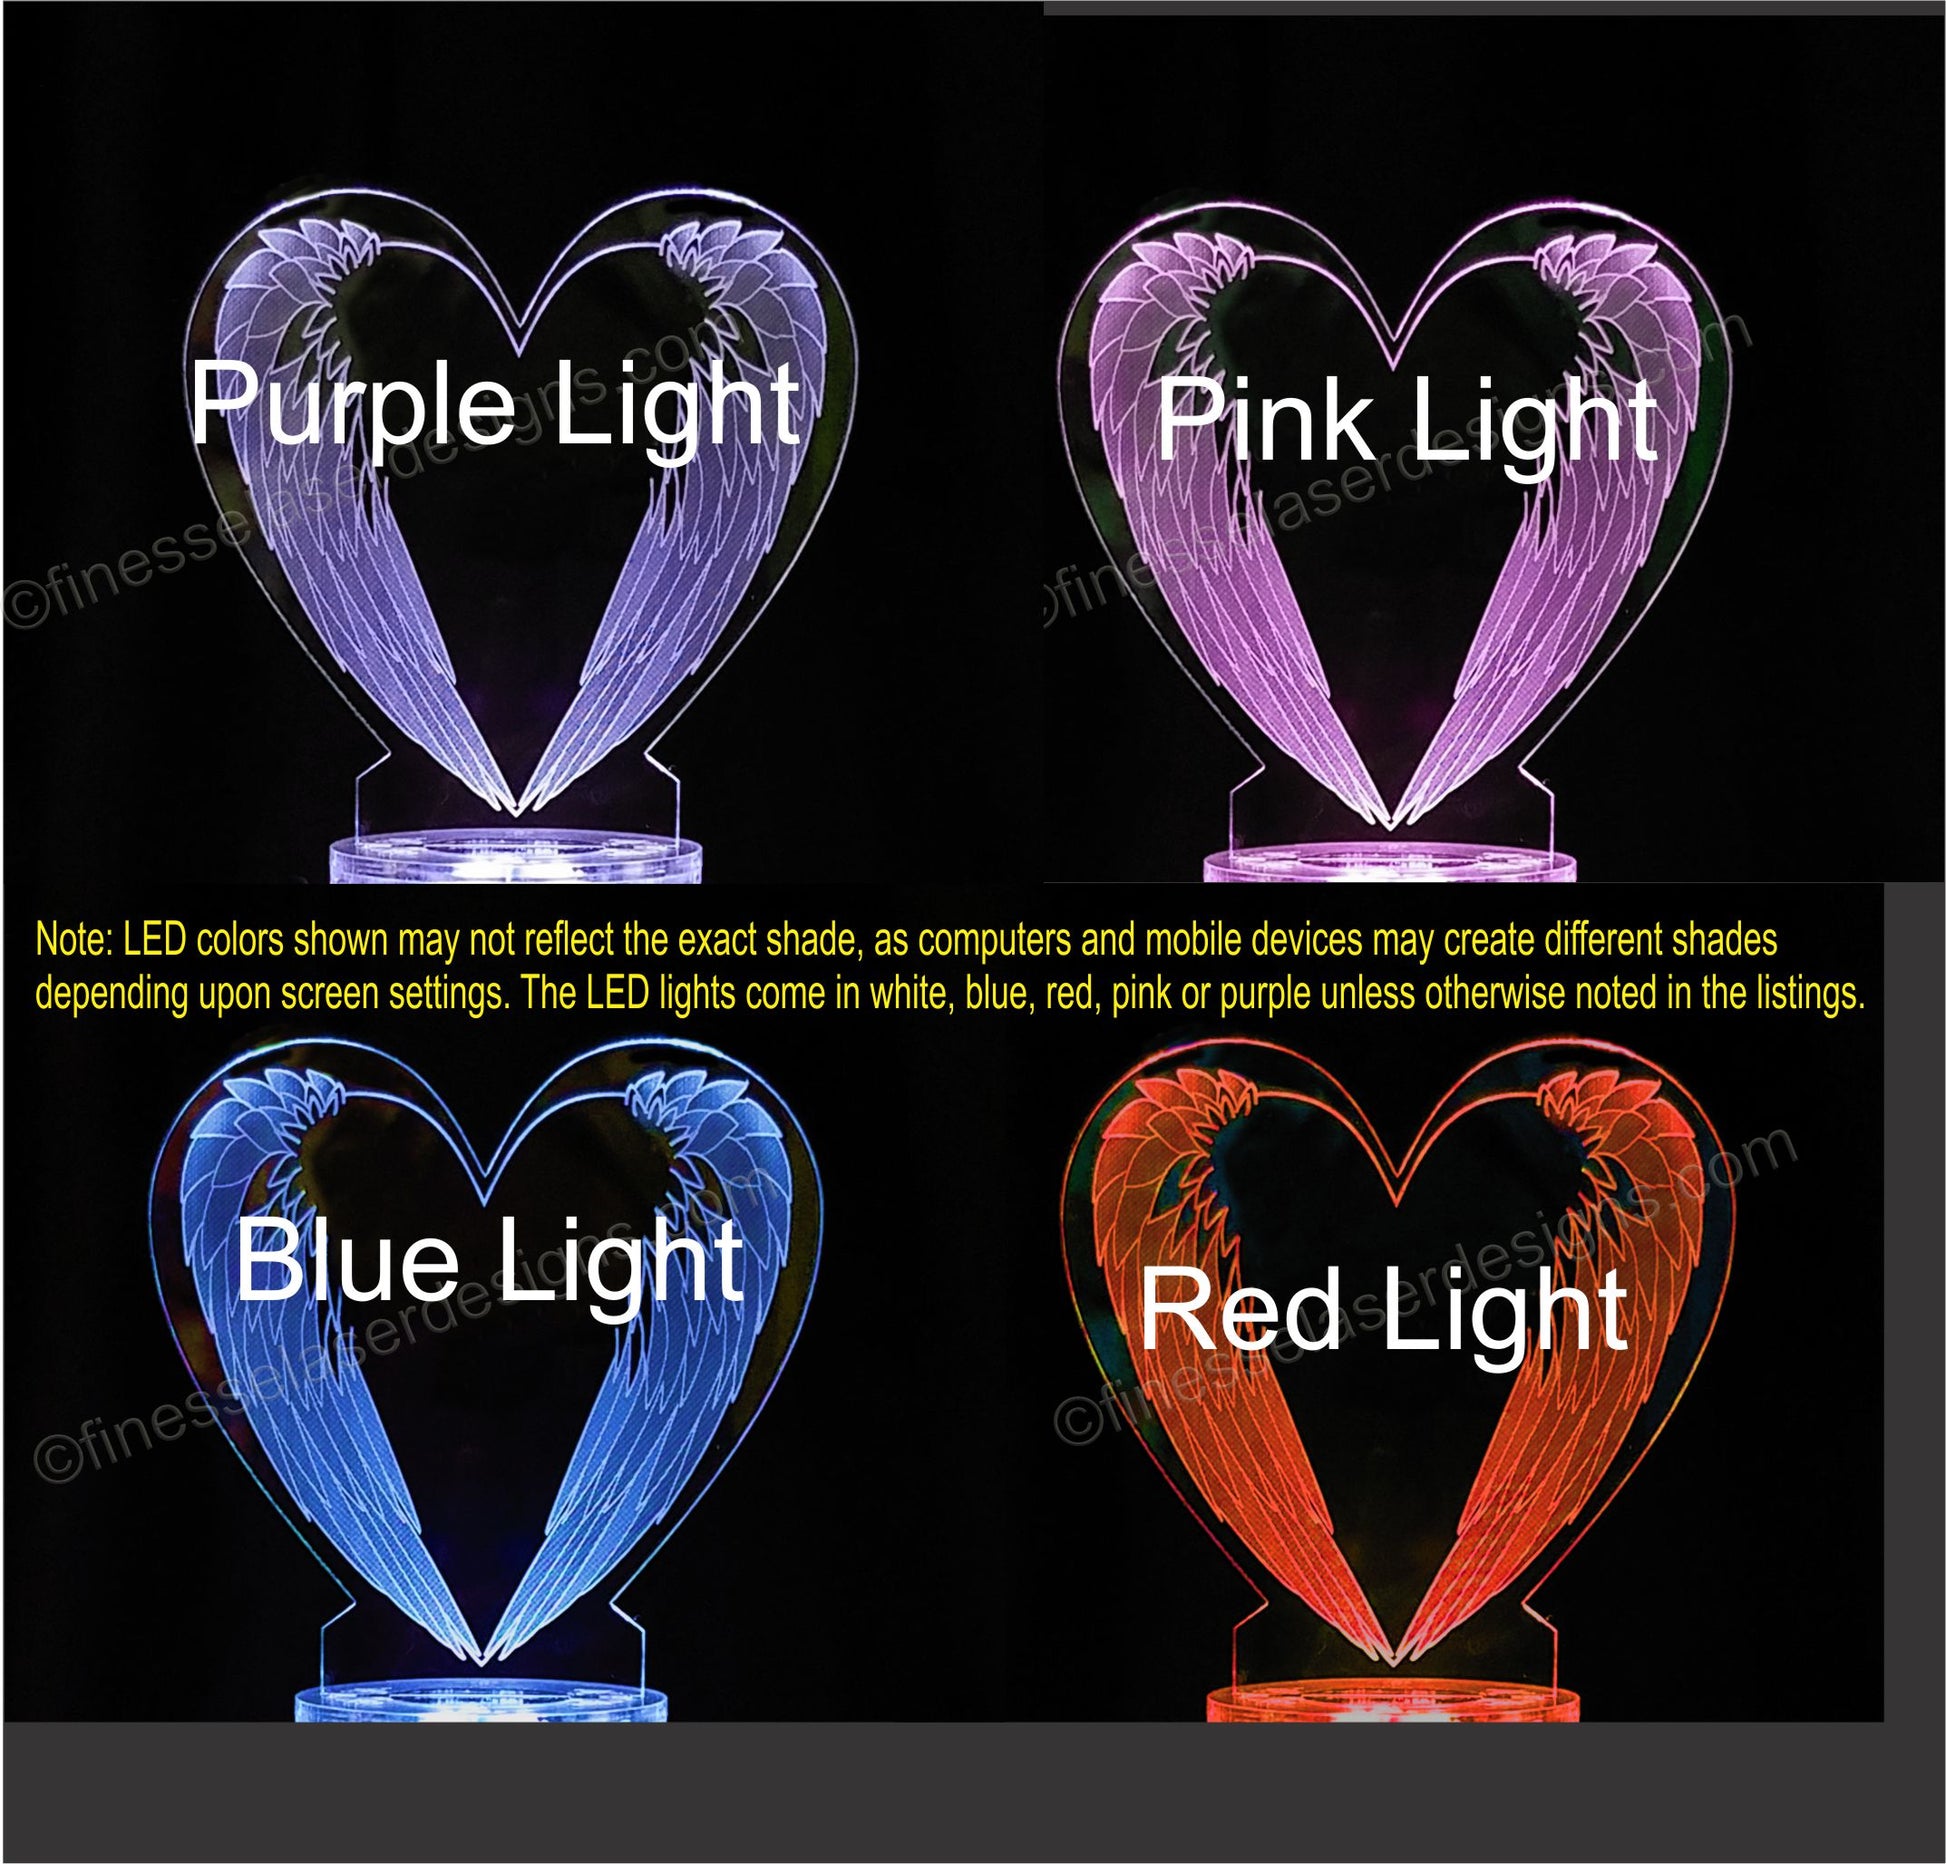 Colored views of acrylic heart shaped cake topper with downward angel wing engraved showing pink, purple, blue and red lighted views